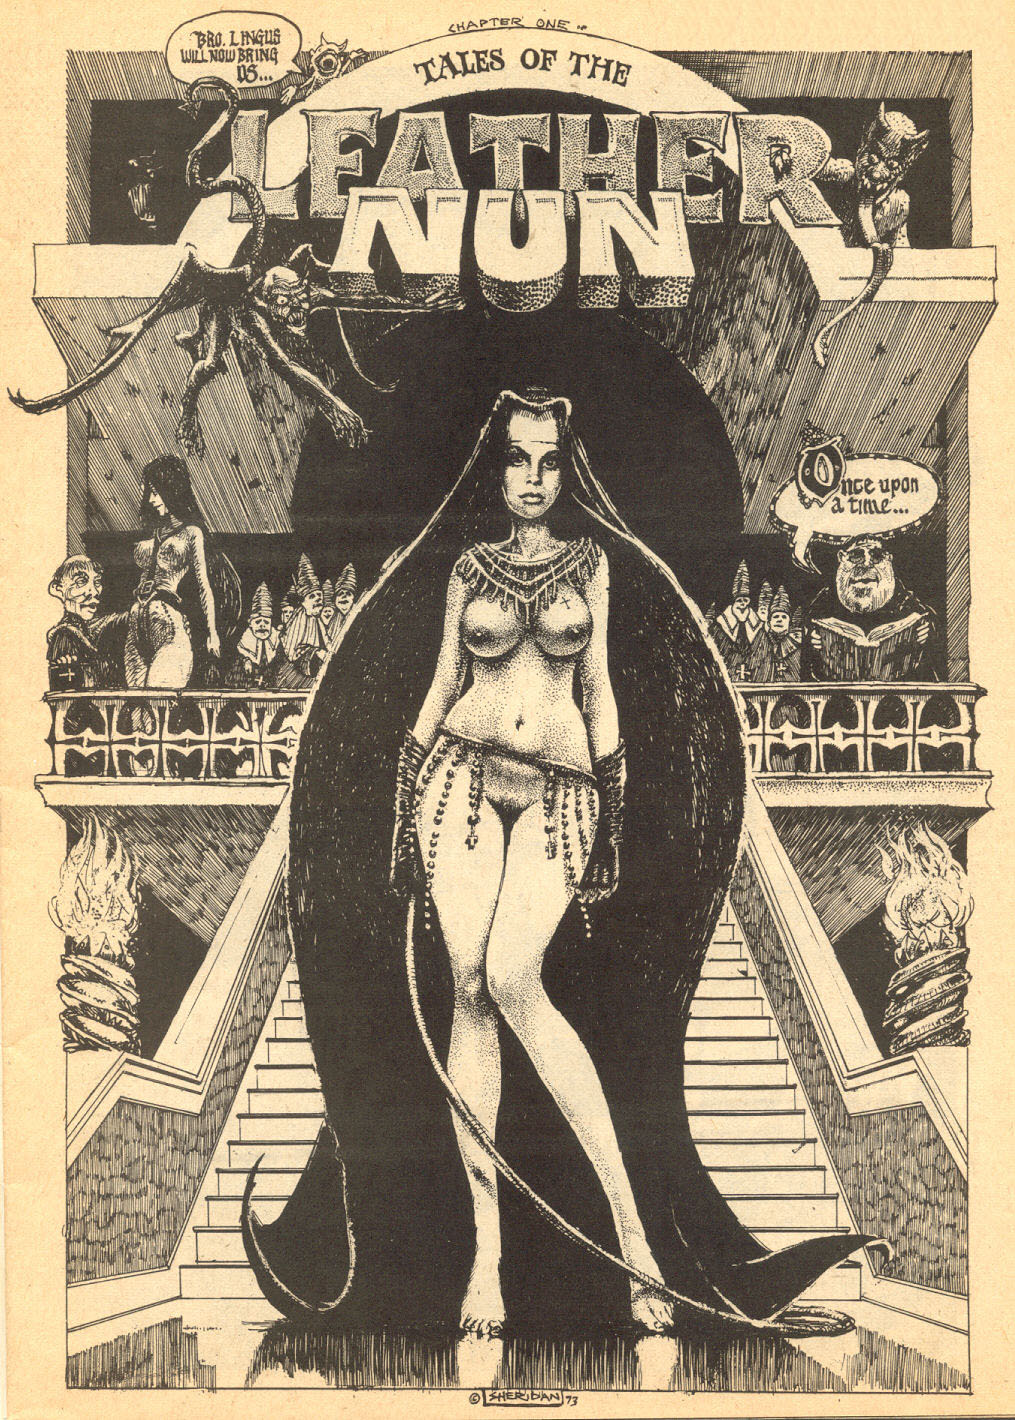 Tales from the Leather Nun #1 